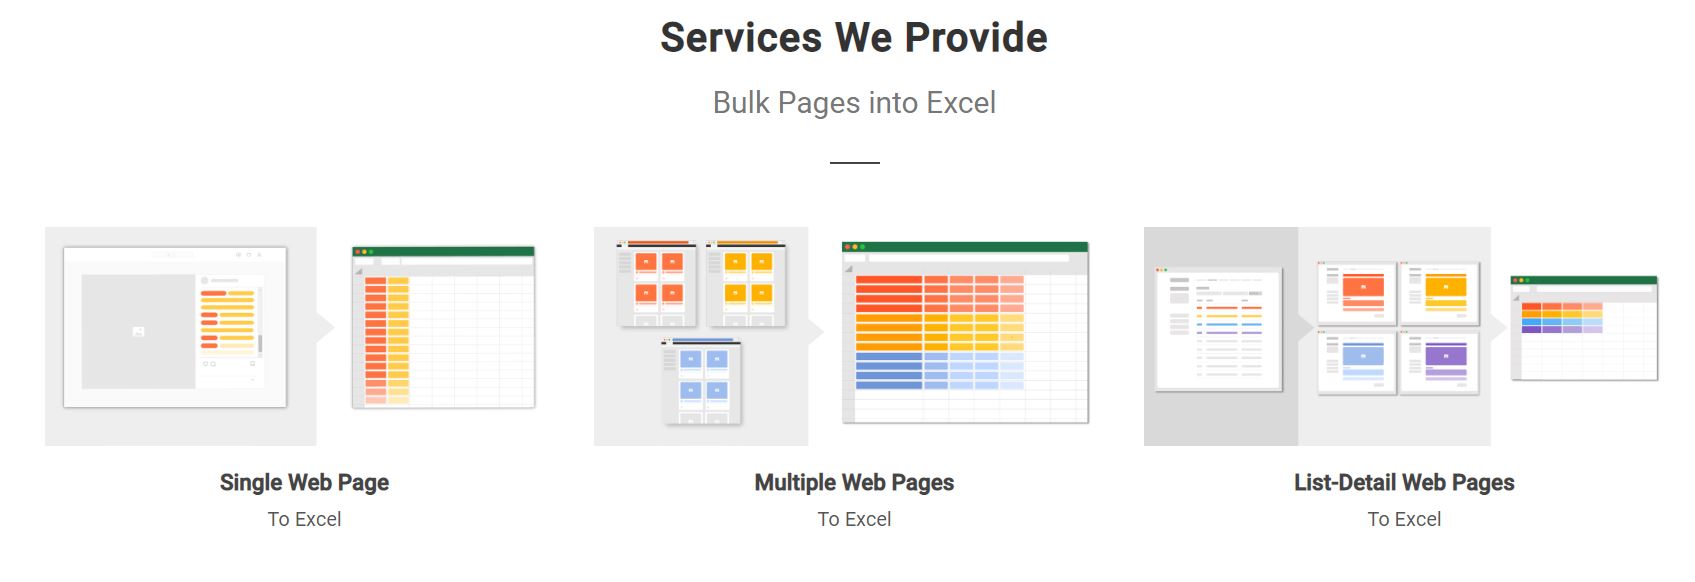 Services We Provide Bulk Pages into Excel